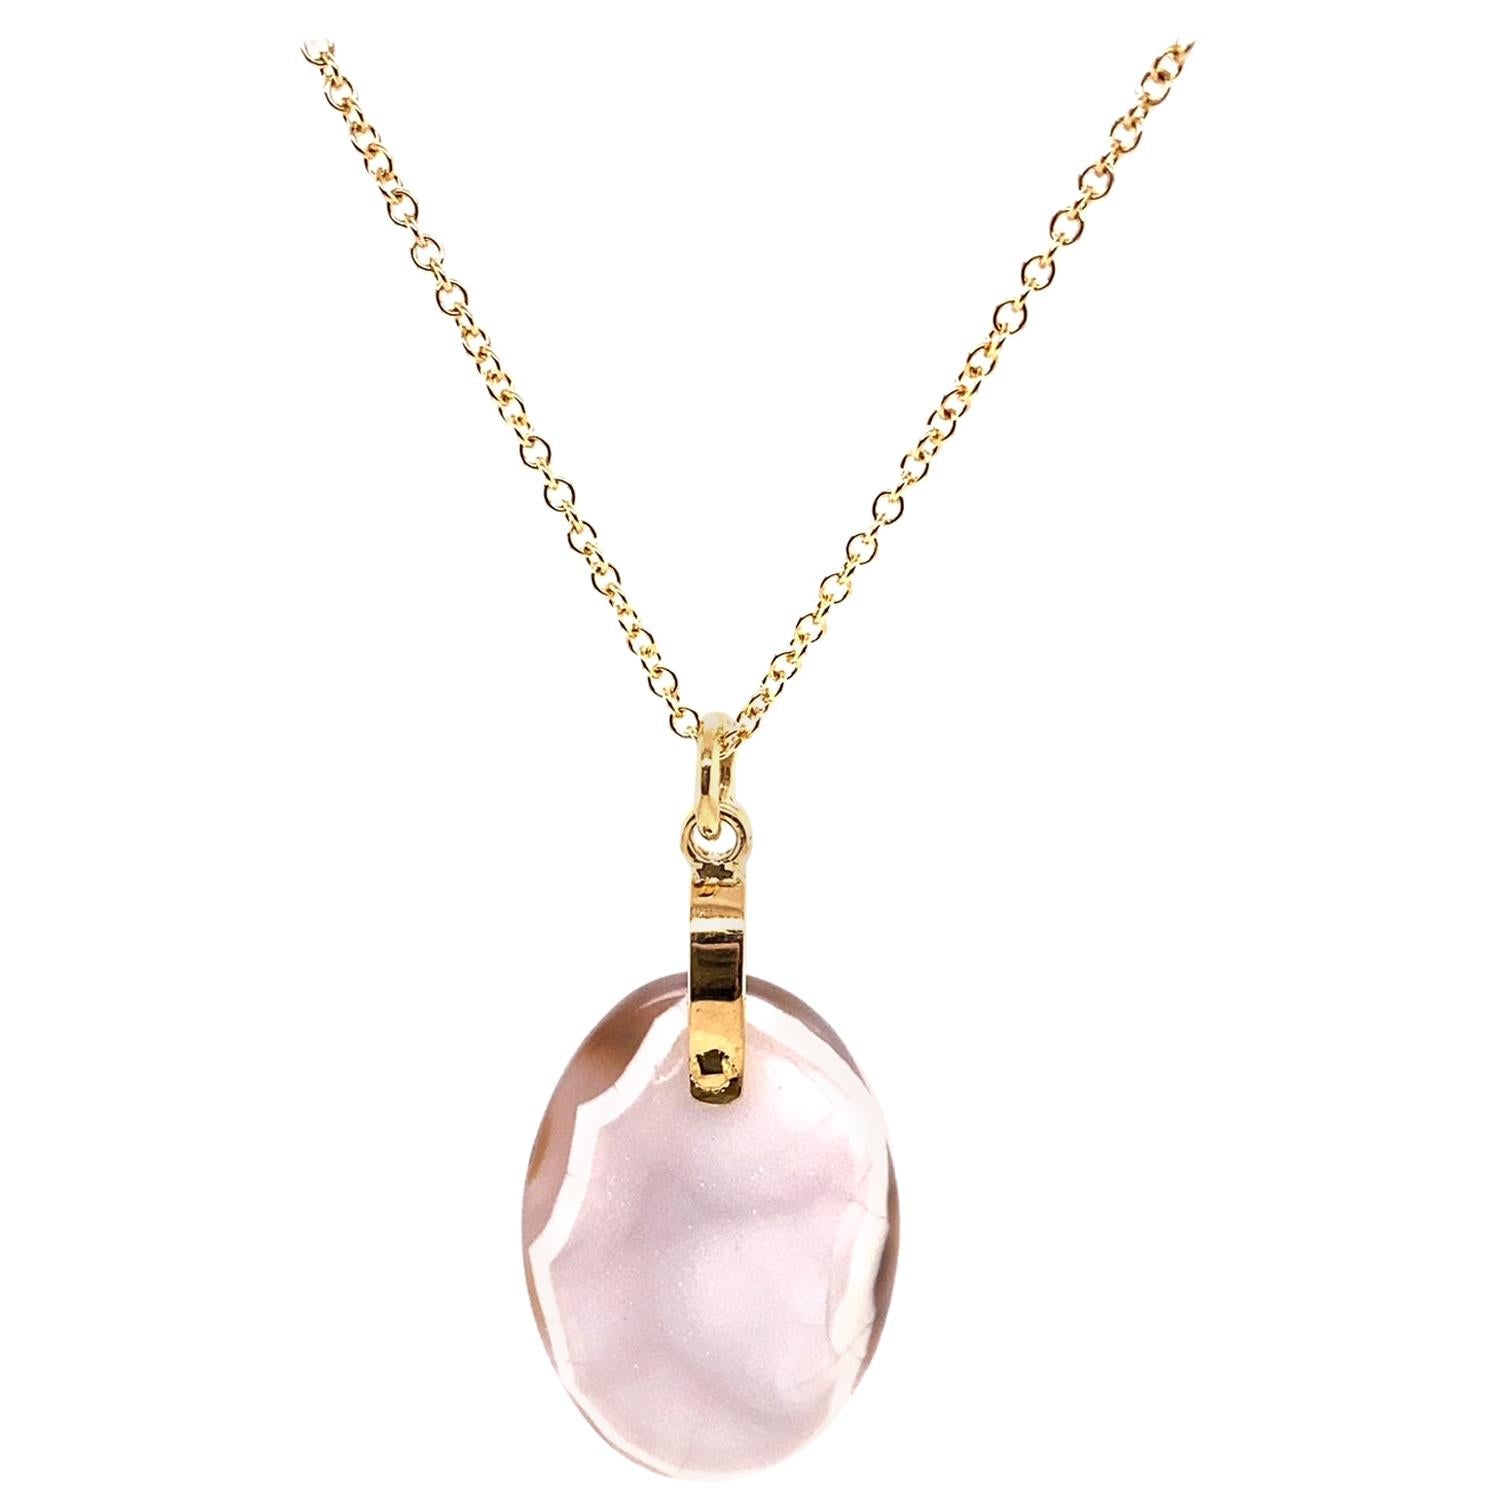 18k Yellow Gold White Oval Druzy Pendant on a 14k Yellow Gold Chain For Sale